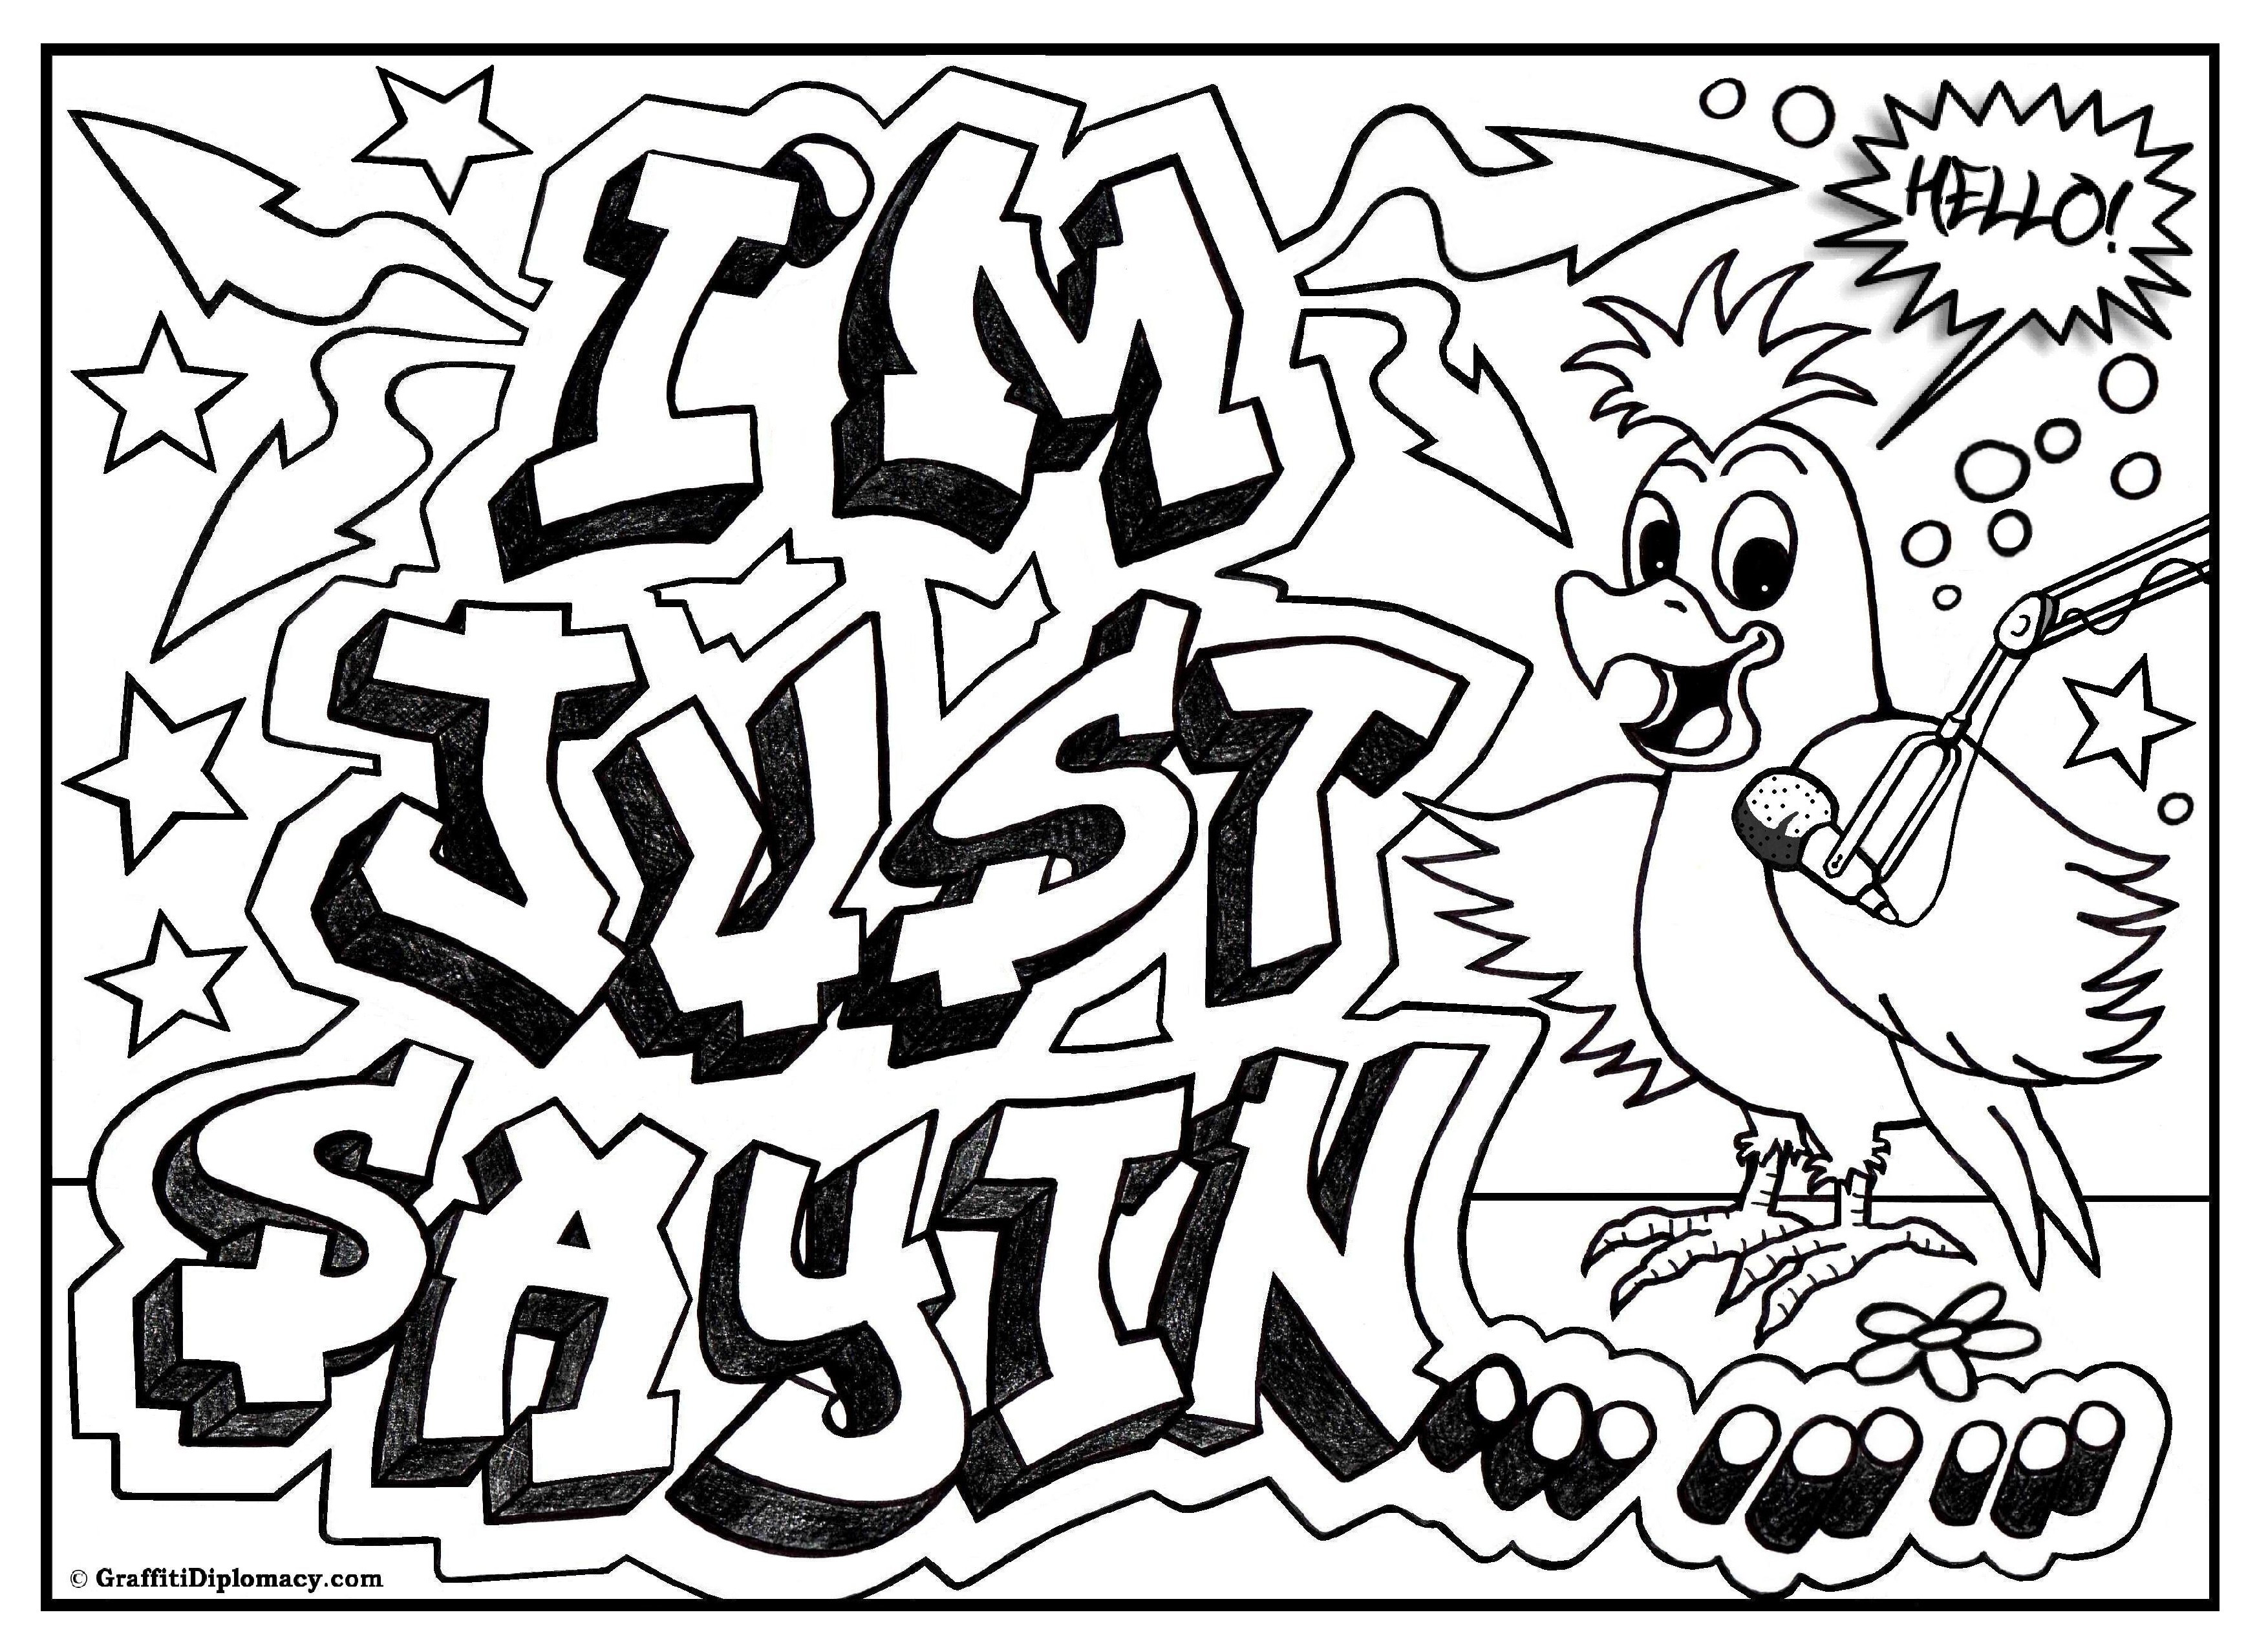 Coloring Pages Yhat Says No Boys
 OMG Another Graffiti Coloring Book of Room Signs Learn